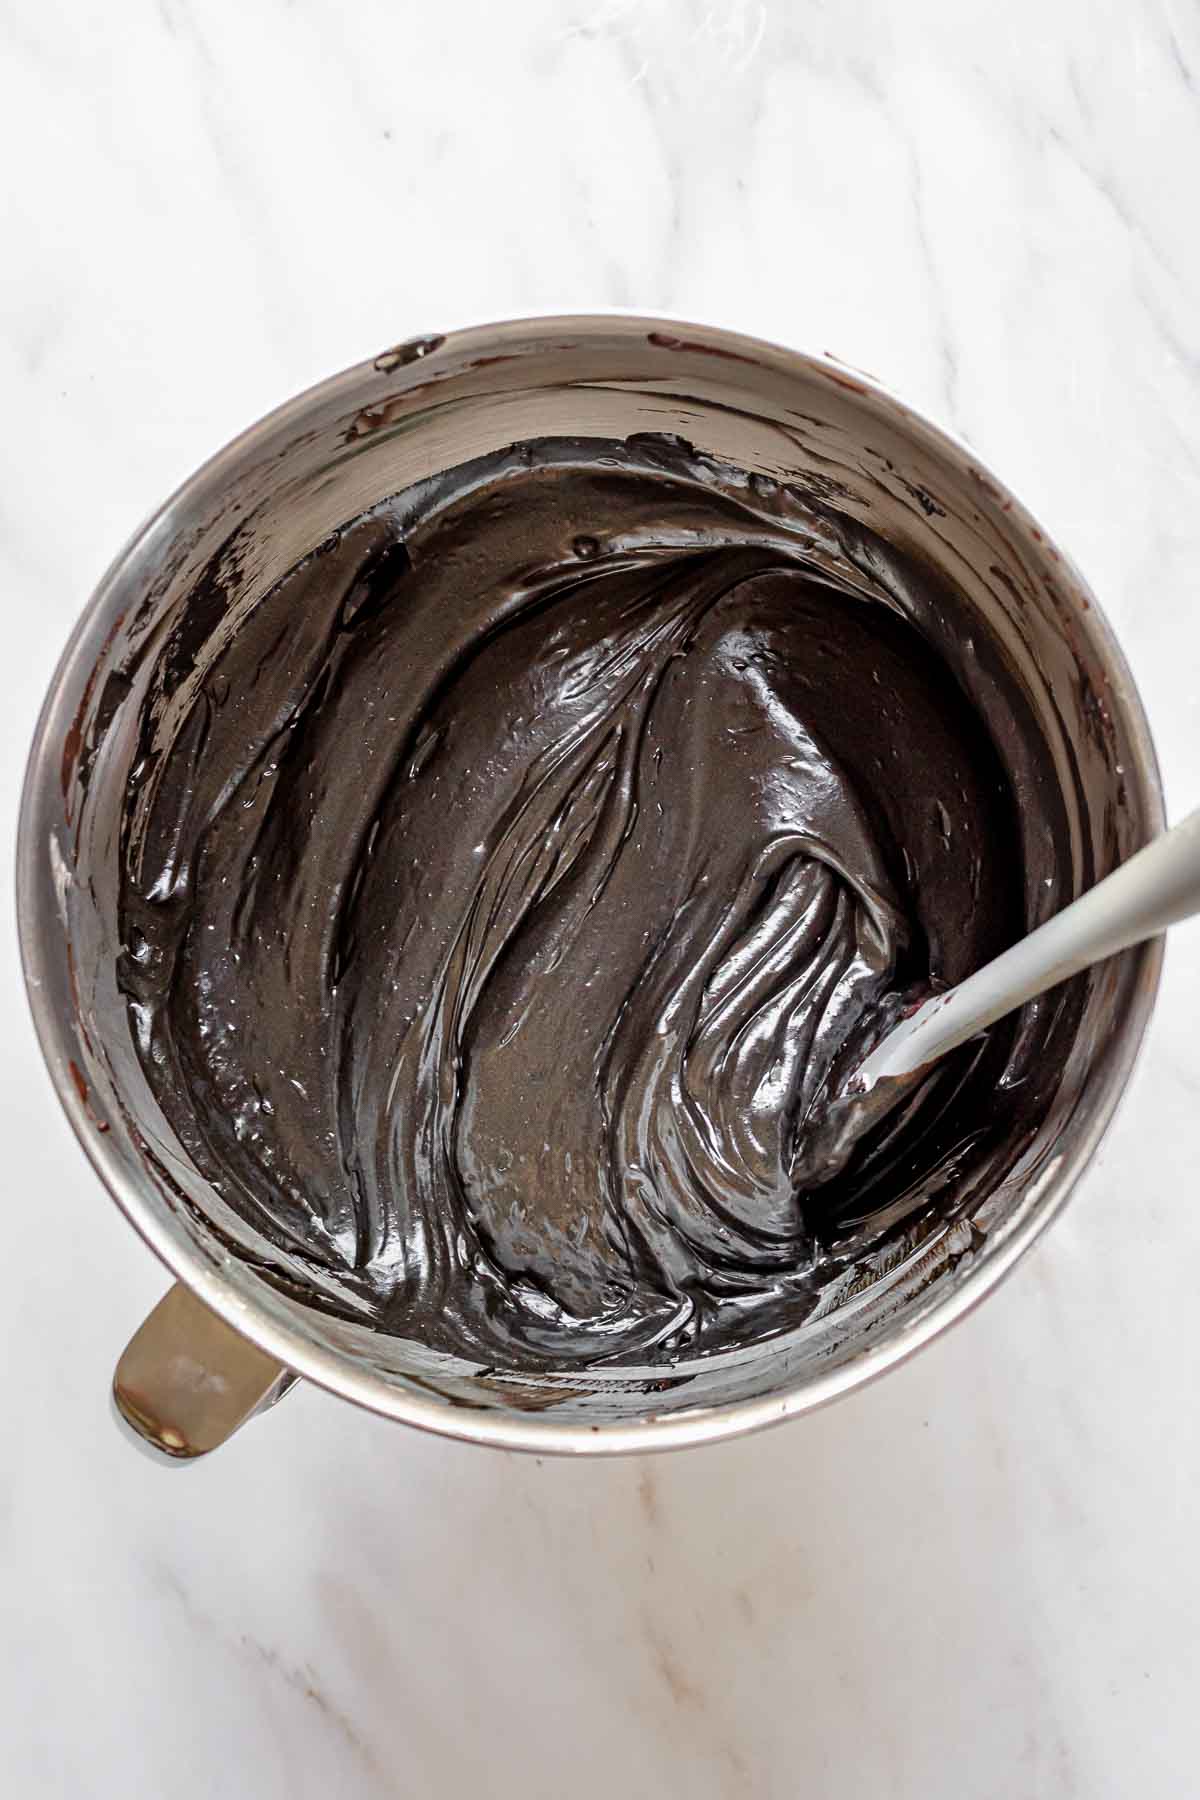 Finished black frosting in a bowl.